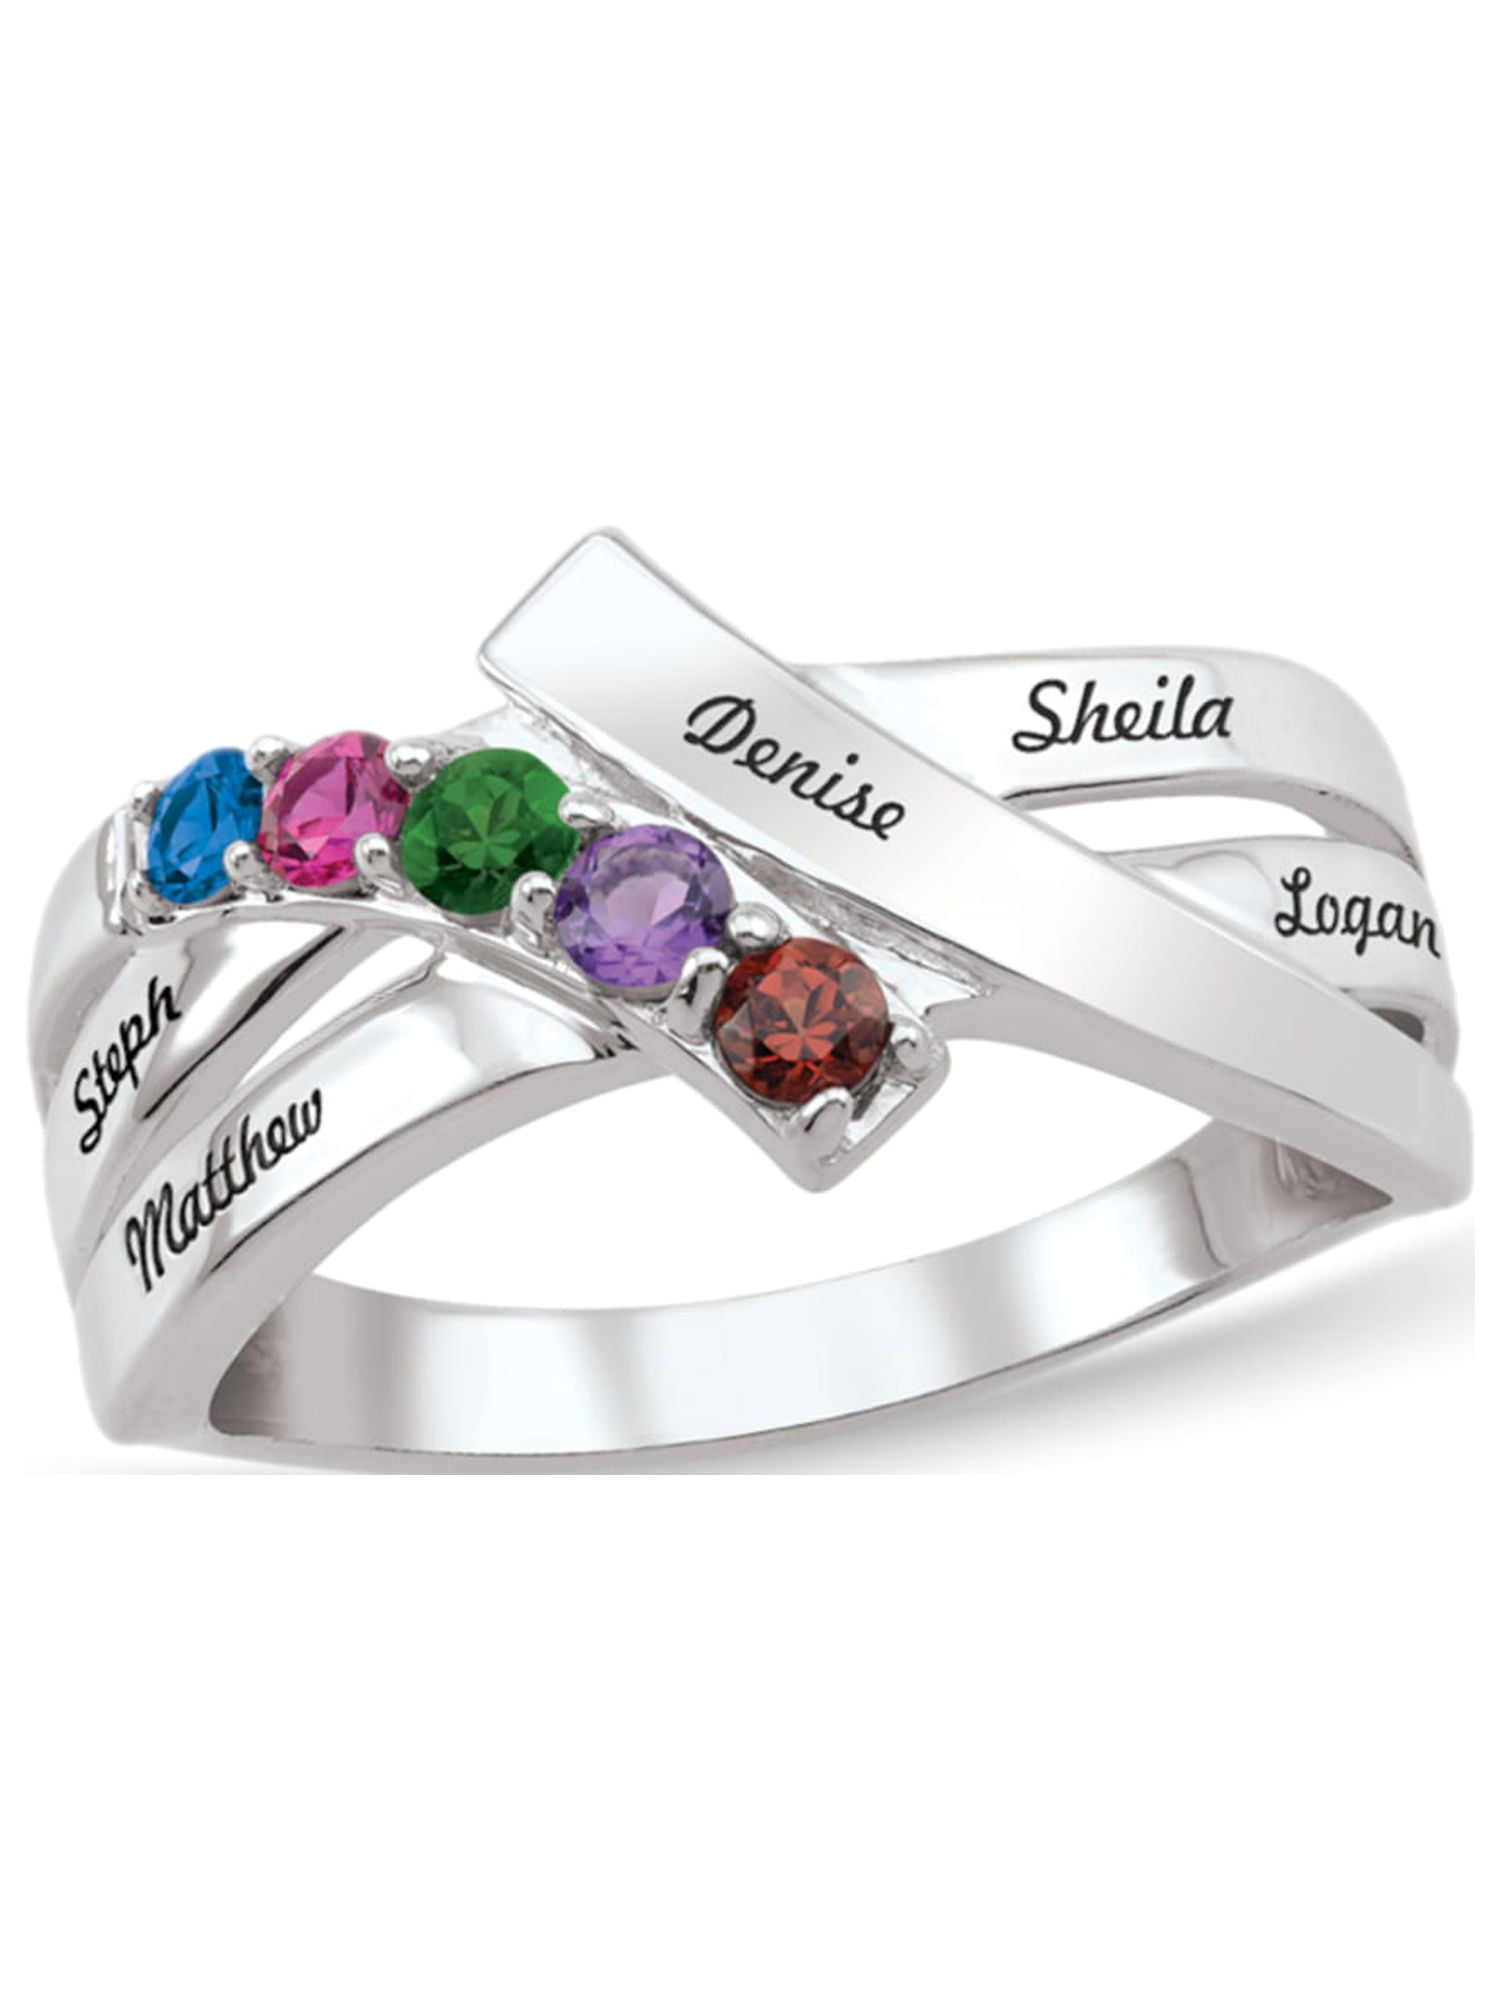 Name Rings | Personalized Name Rings Online at Zestpics